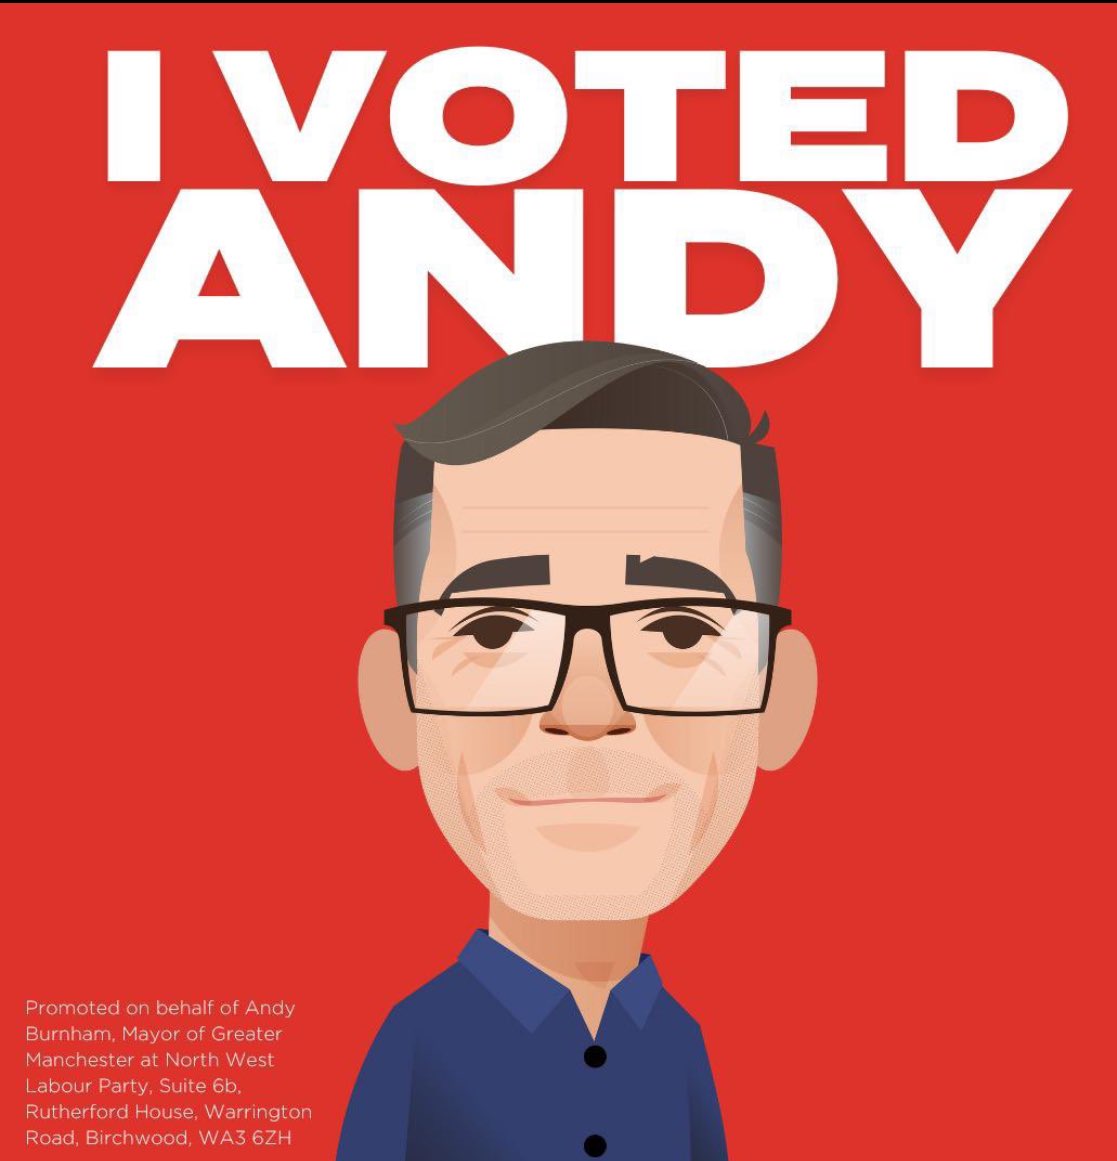 There is no other person who has the best intentions for our great city than Andy Burnham. Our current Mayor has been hugely supportive to all the work at @mosssidefirebox please get out and use your vote for @AndyBurnhamGM 🙏🏼👊🏼